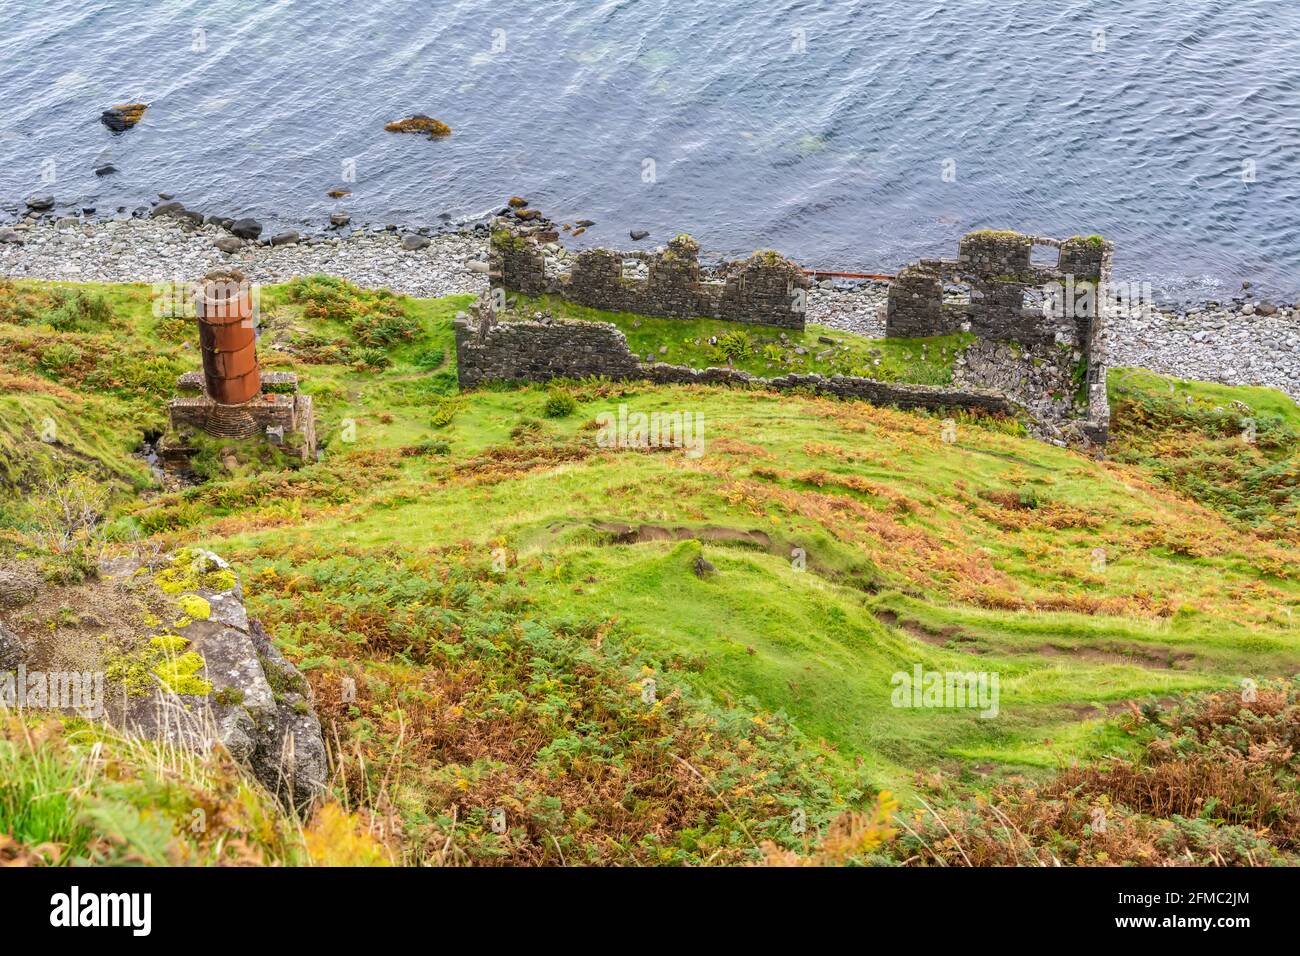 Remains of the drying shed and chimney of diatomite works on the Lealt coast in the Isle of Skye, Scotland. The drying shed was where the diatomite wa Stock Photo